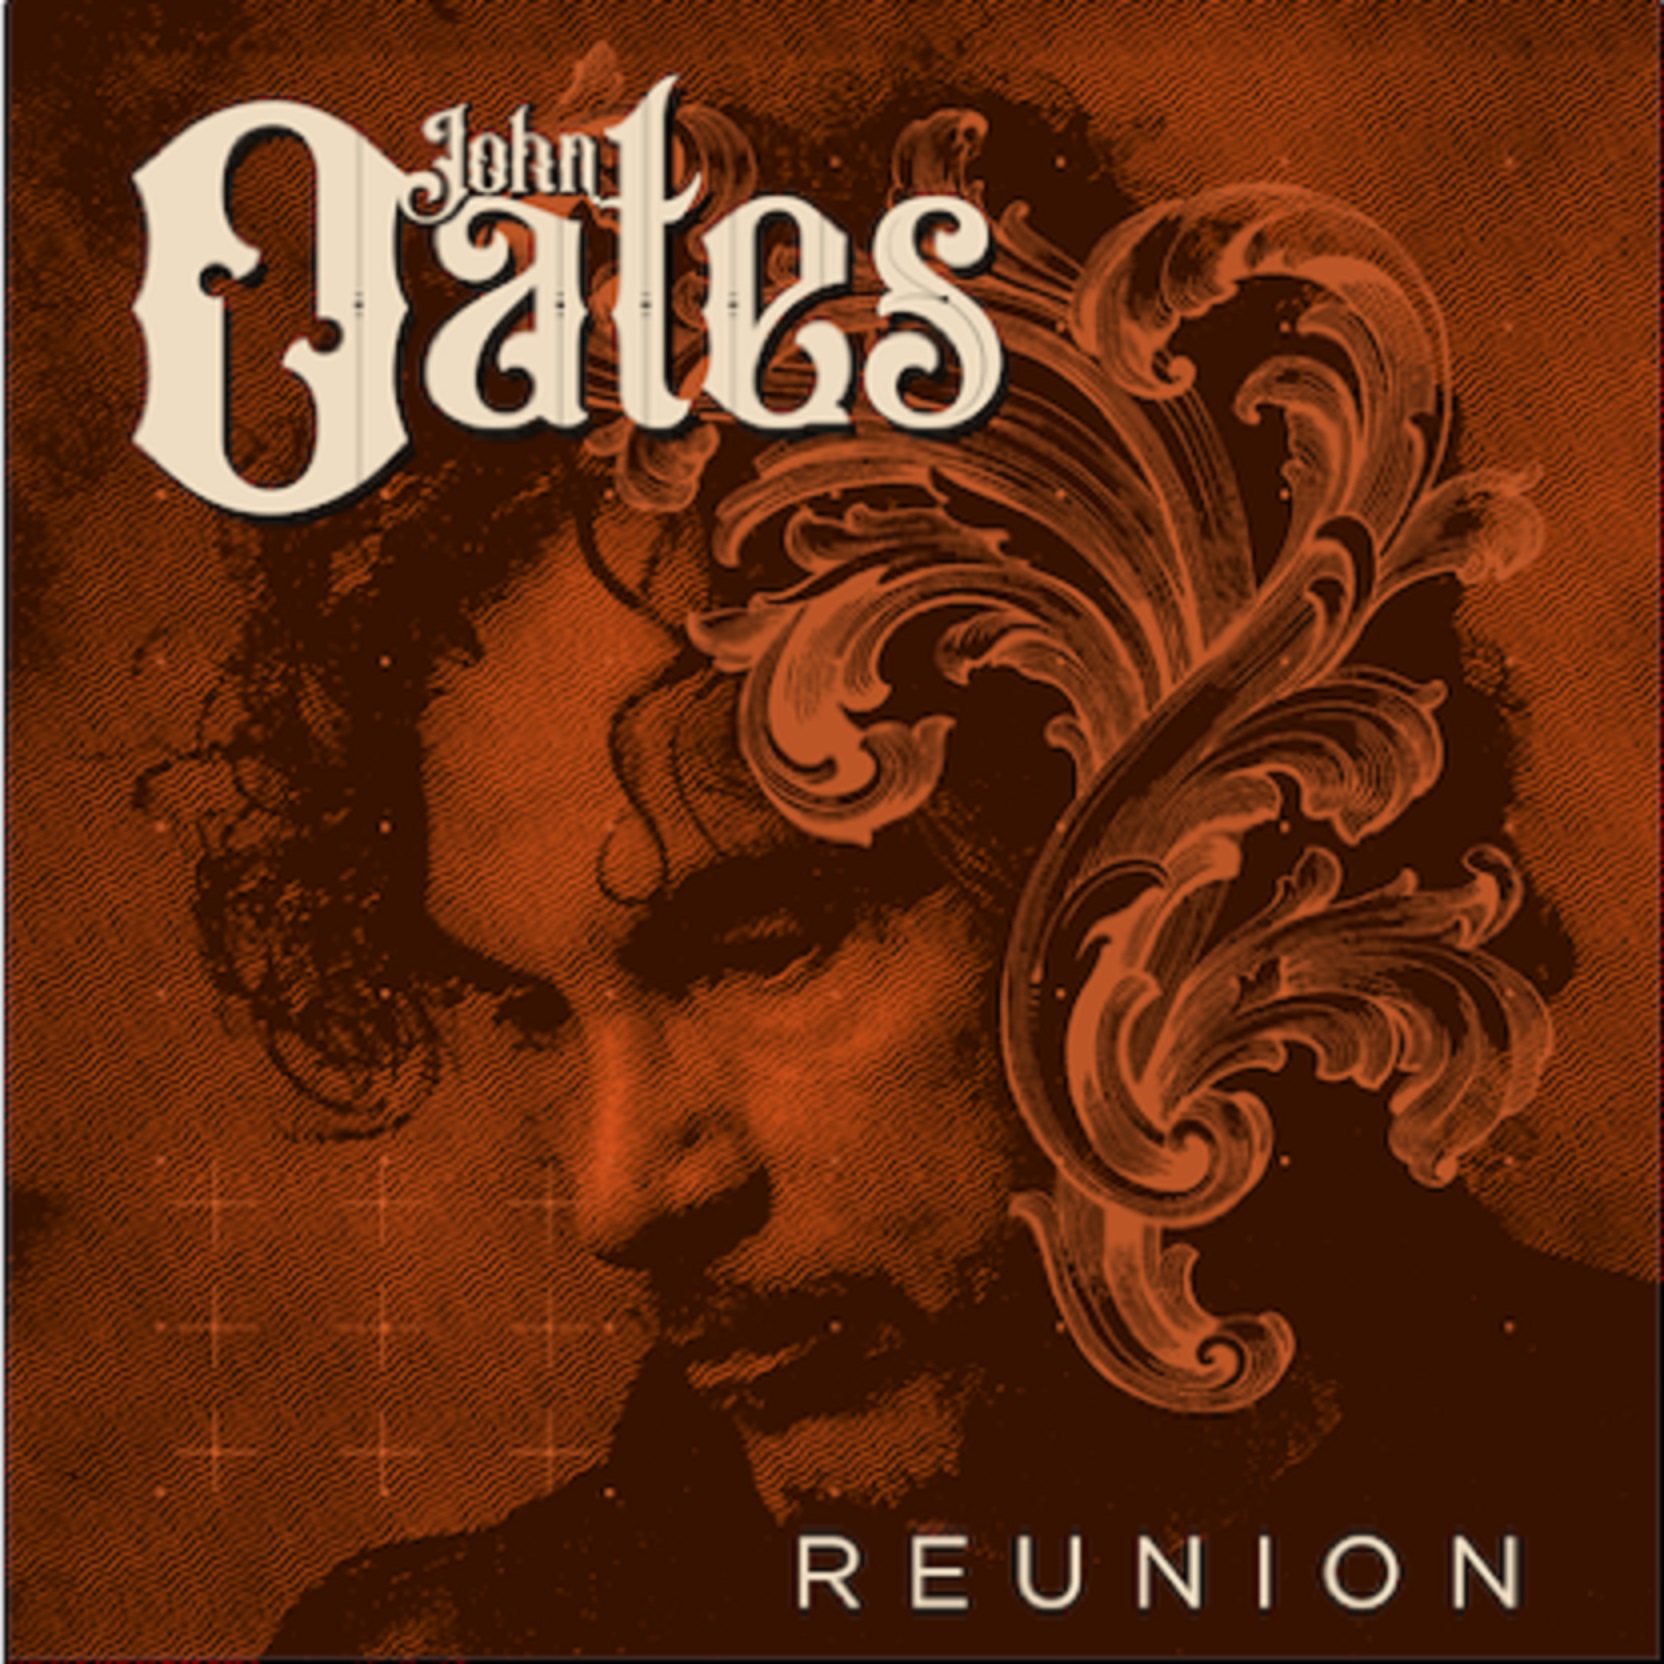 JOHN OATES Announces New Album Reunion To Be Released on May 17; Title Track “Reunion” Out Now